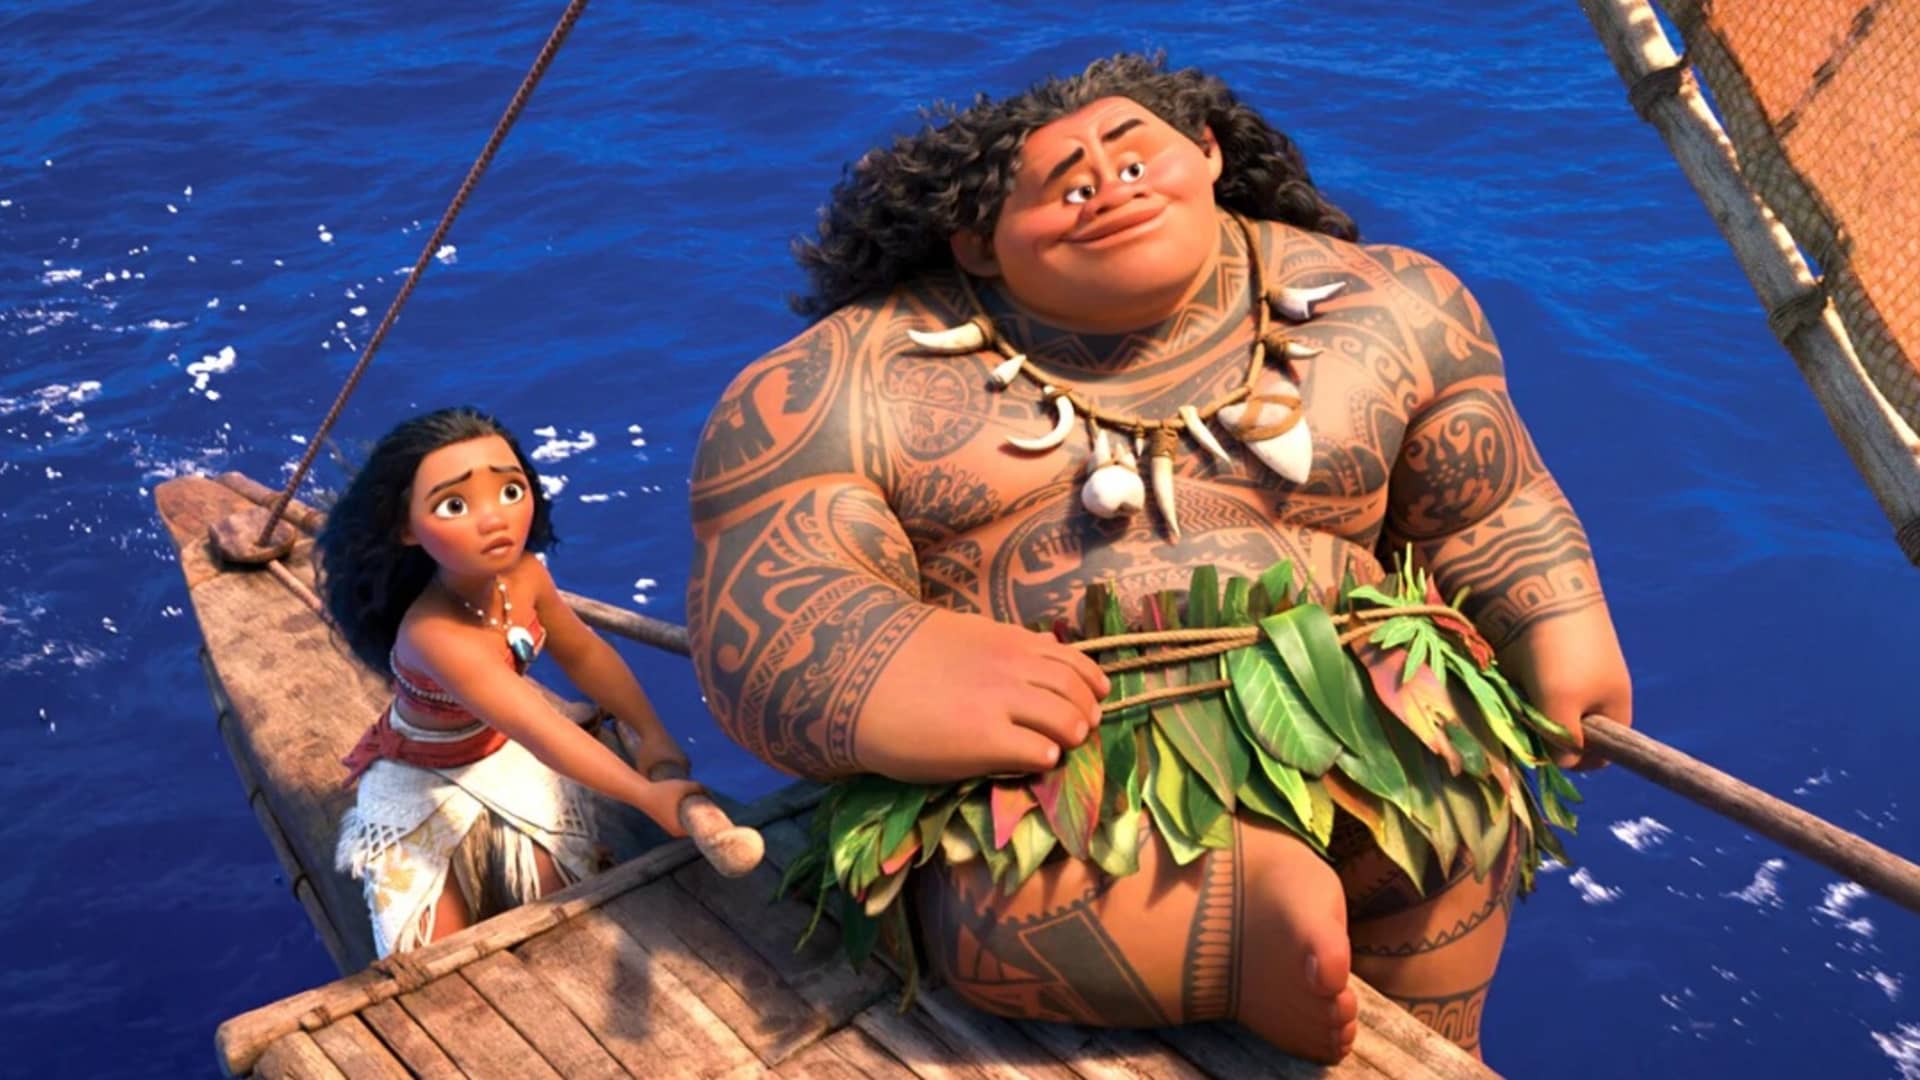 Disney is releasing a 'Moana' sequel in theaters this Thanksgiving